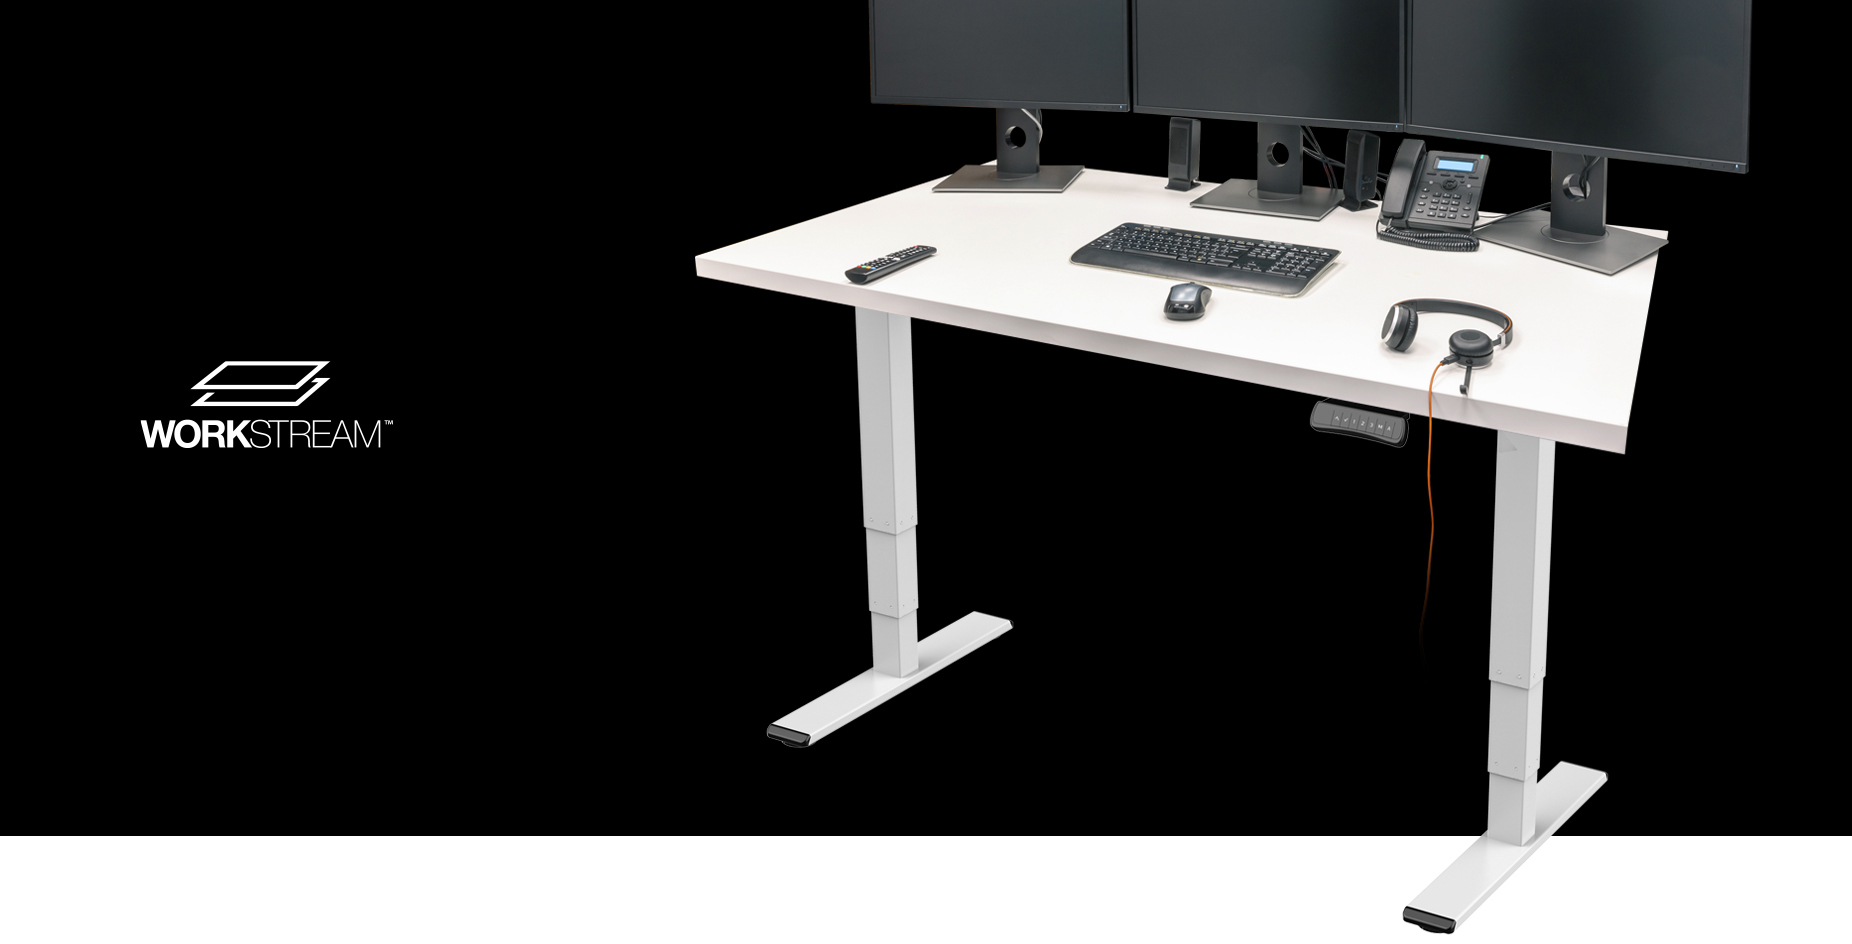 Monoprice Dual Motor Height Adjustable 3-Stage Electric Sit-Stand Desk  Frame, v2, White 